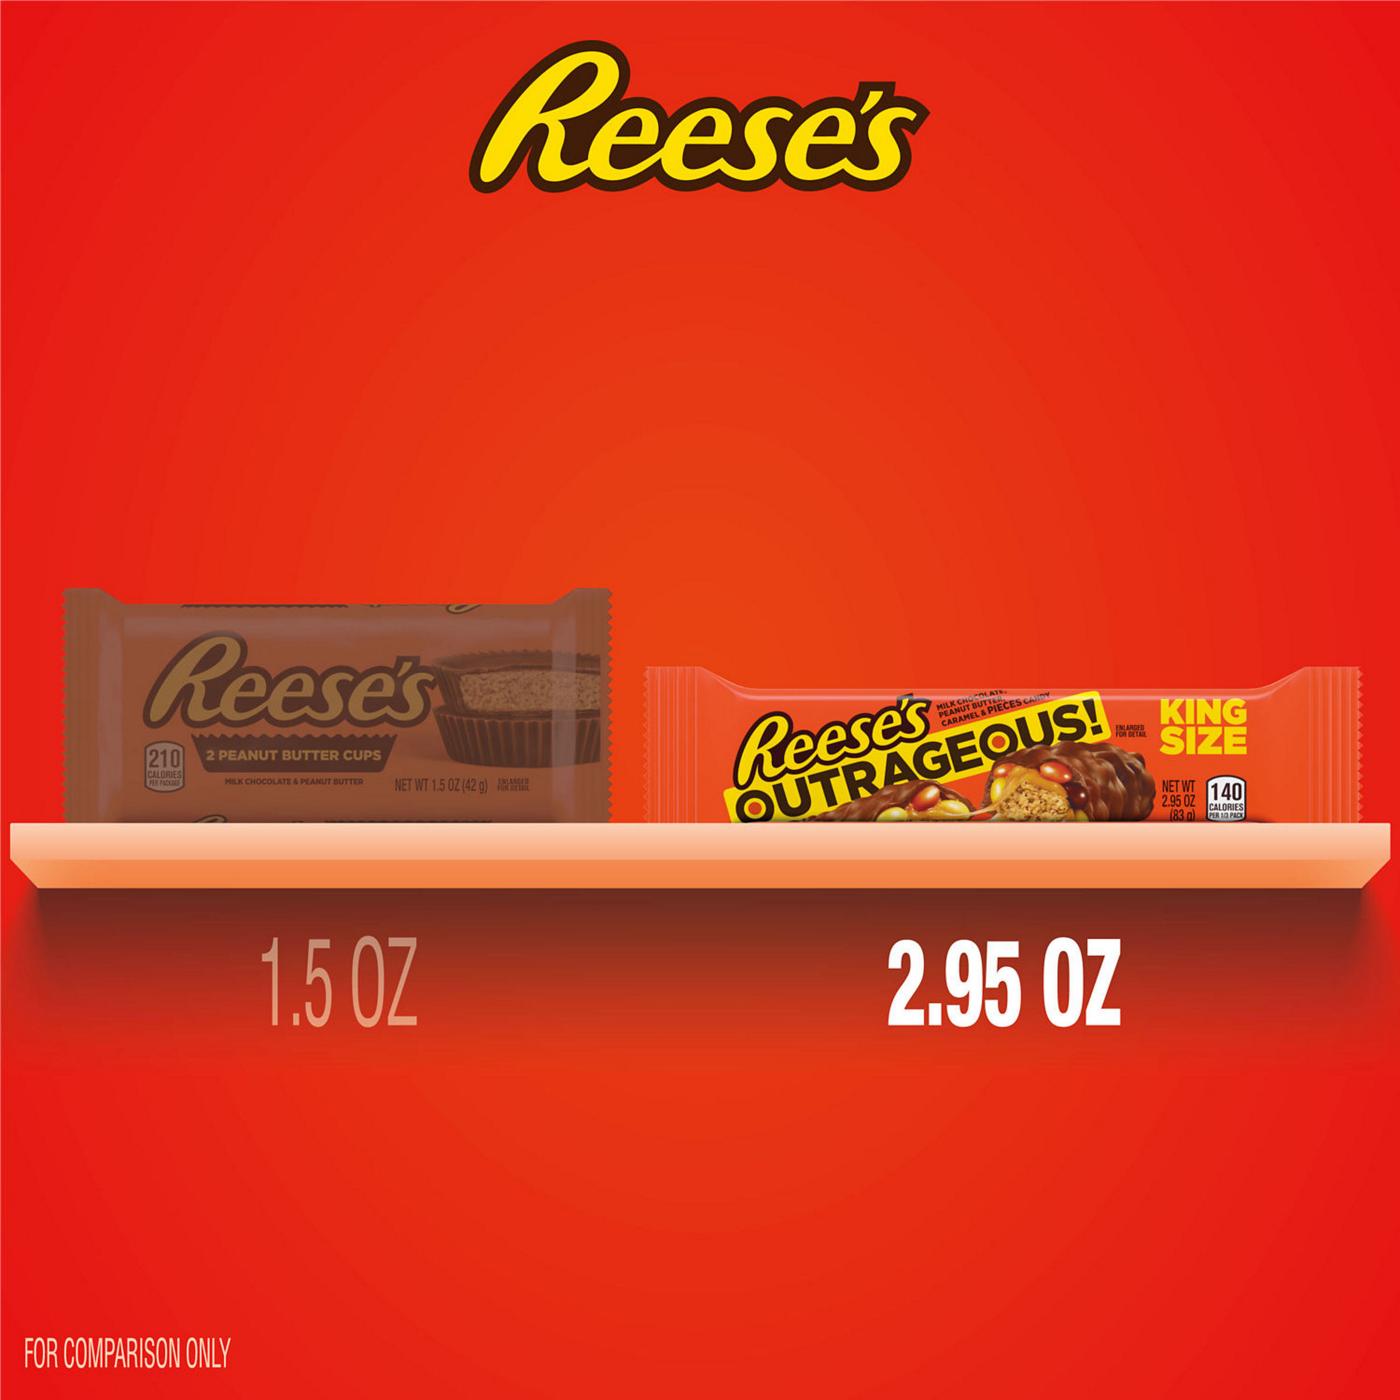 Reese's Outrageous! Milk Chocolate Peanut Butter Candy Bar - King Size; image 5 of 7